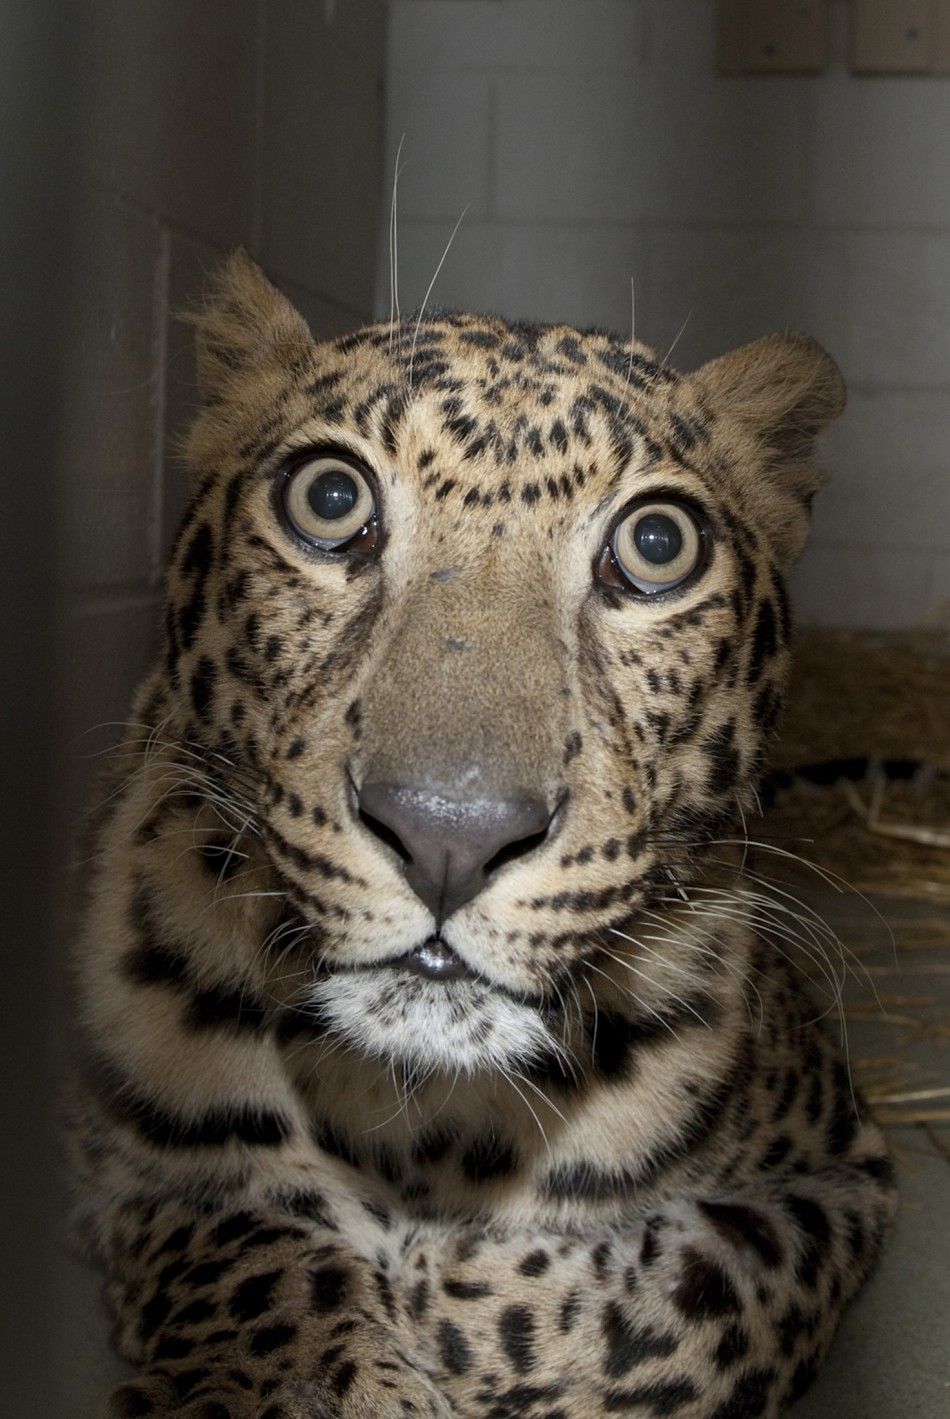 A rescued leopard is pictured at the Columbus Zoo and Aquarium